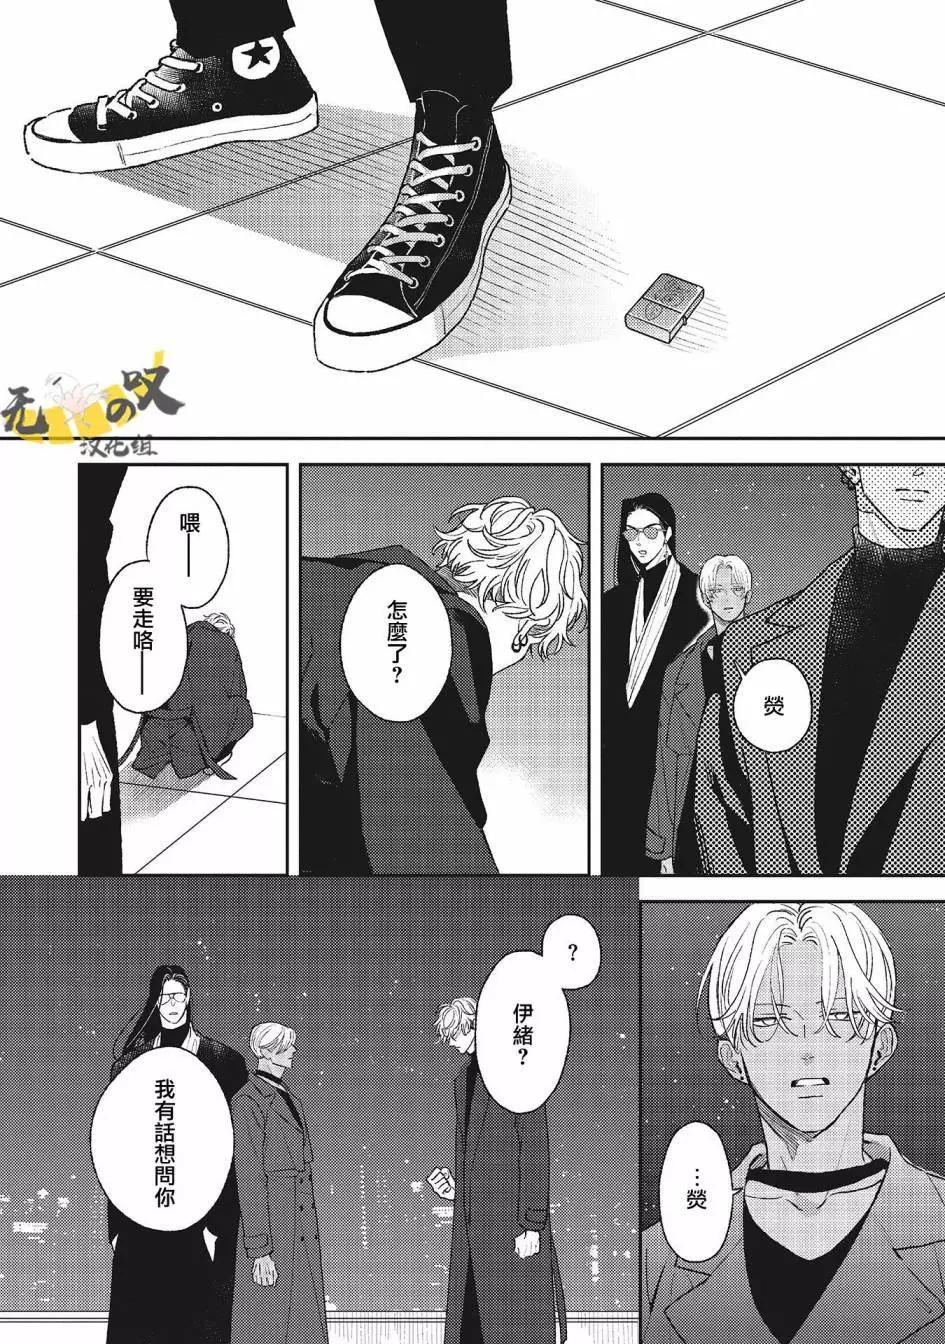 His Little Amber - 第07話 - 6